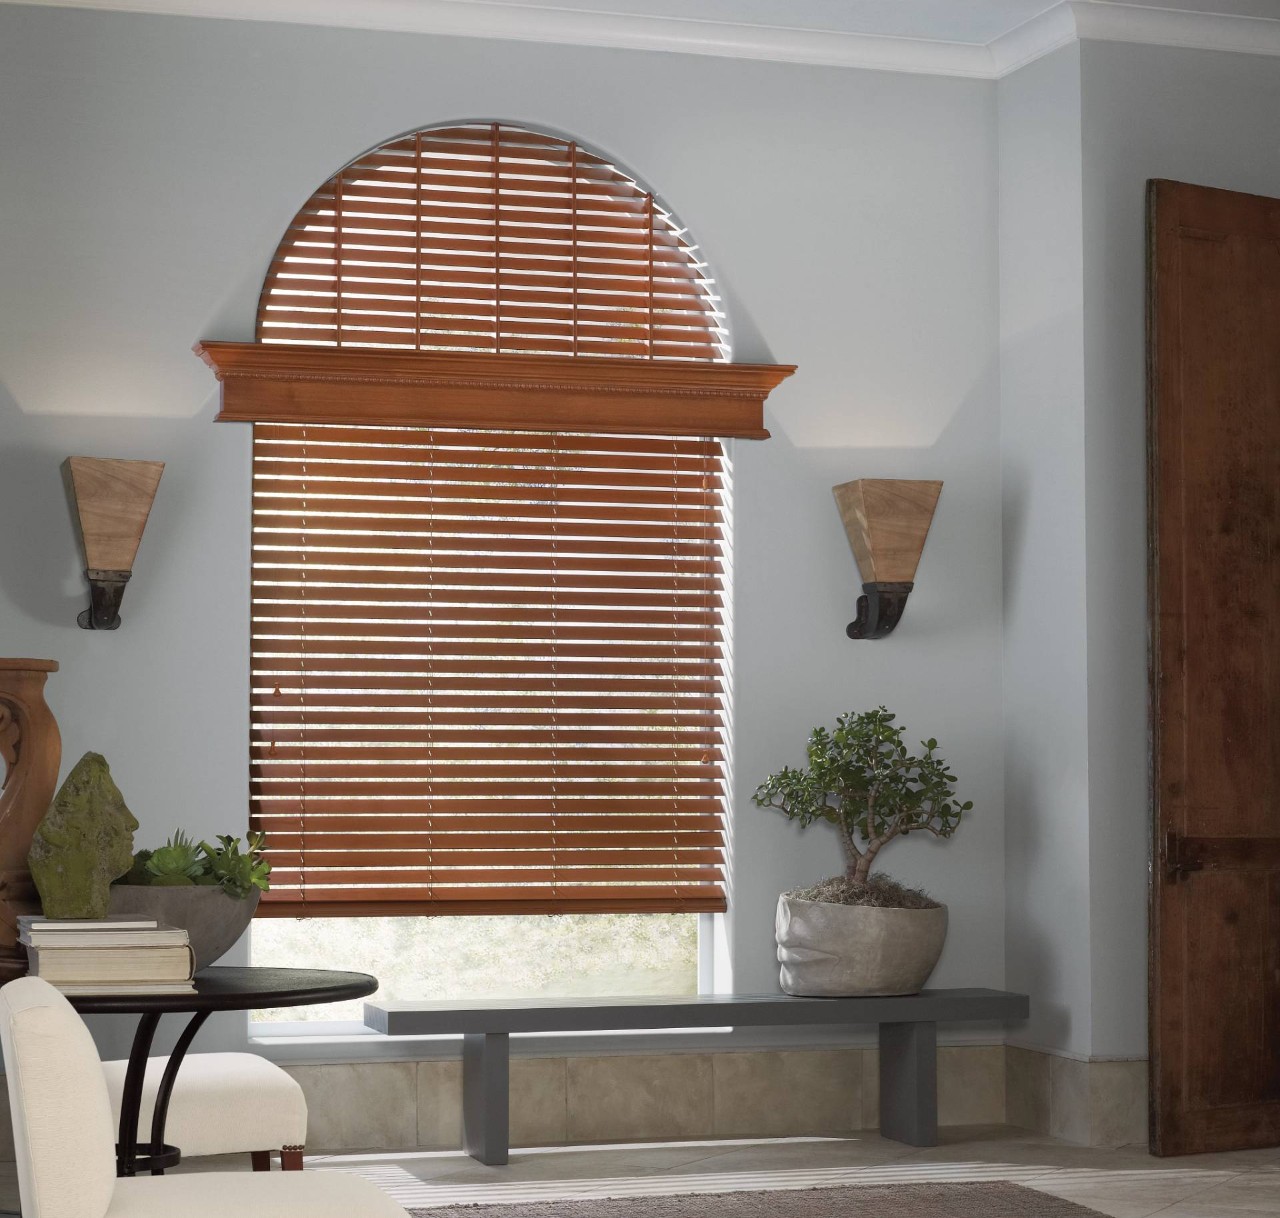 Hunter Douglas Parkland® Wood Blinds in an arched window Albuquerque, New Mexico (NM)